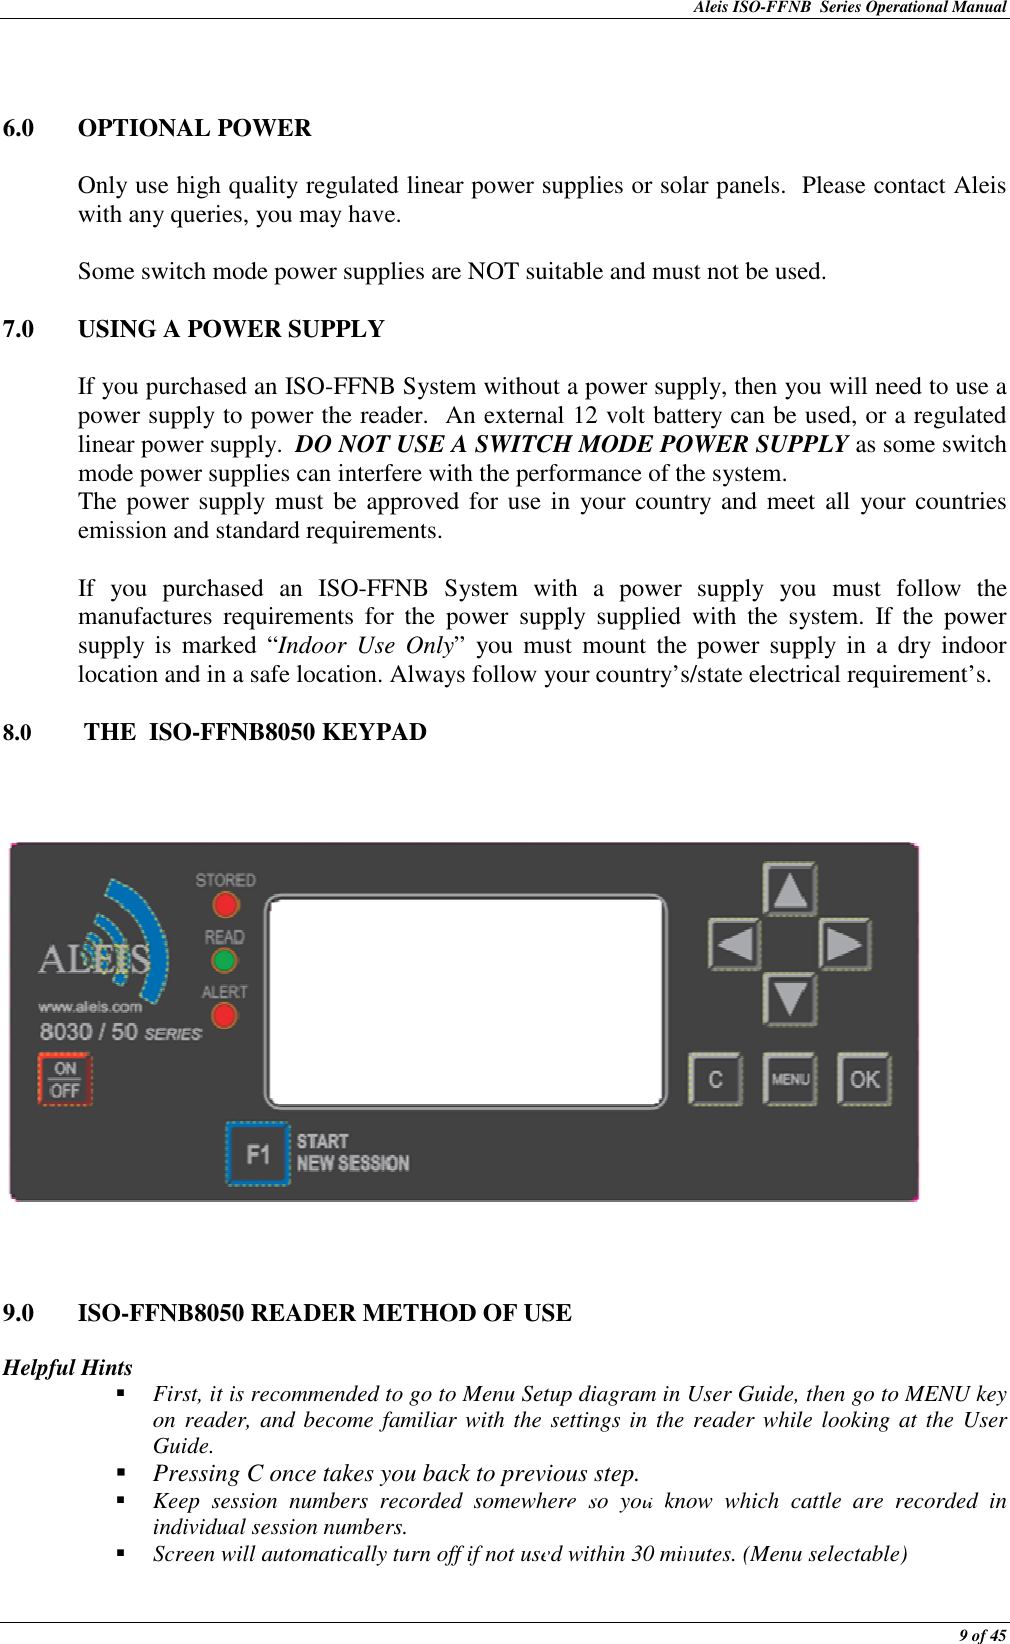 Aleis ISO-FFNB  Series Operational Manual  9 of 45   6.0  OPTIONAL POWER  Only use high quality regulated linear power supplies or solar panels.  Please contact Aleis with any queries, you may have.  Some switch mode power supplies are NOT suitable and must not be used.  7.0  USING A POWER SUPPLY   If you purchased an ISO-FFNB System without a power supply, then you will need to use a power supply to power the reader.  An external 12 volt battery can be used, or a regulated linear power supply.  DO NOT USE A SWITCH MODE POWER SUPPLY as some switch mode power supplies can interfere with the performance of the system. The power supply must  be approved  for use  in your country and meet all your countries emission and standard requirements.  If  you  purchased  an  ISO-FFNB  System  with  a  power  supply  you  must  follow  the manufactures  requirements  for  the  power  supply  supplied  with  the  system.  If  the  power supply  is  marked  “Indoor  Use  Only”  you  must  mount  the  power  supply  in  a  dry indoor location and in a safe location. Always follow your country’s/state electrical requirement’s.     8.0   THE  ISO-FFNB8050 KEYPAD         9.0  ISO-FFNB8050 READER METHOD OF USE    Helpful Hints  First, it is recommended to go to Menu Setup diagram in User Guide, then go to MENU key on reader, and become familiar with the settings in the reader while looking at the User Guide.  Pressing C once takes you back to previous step.  Keep  session  numbers  recorded  somewhere  so  you  know  which  cattle  are  recorded  in individual session numbers.  Screen will automatically turn off if not used within 30 minutes. (Menu selectable)  